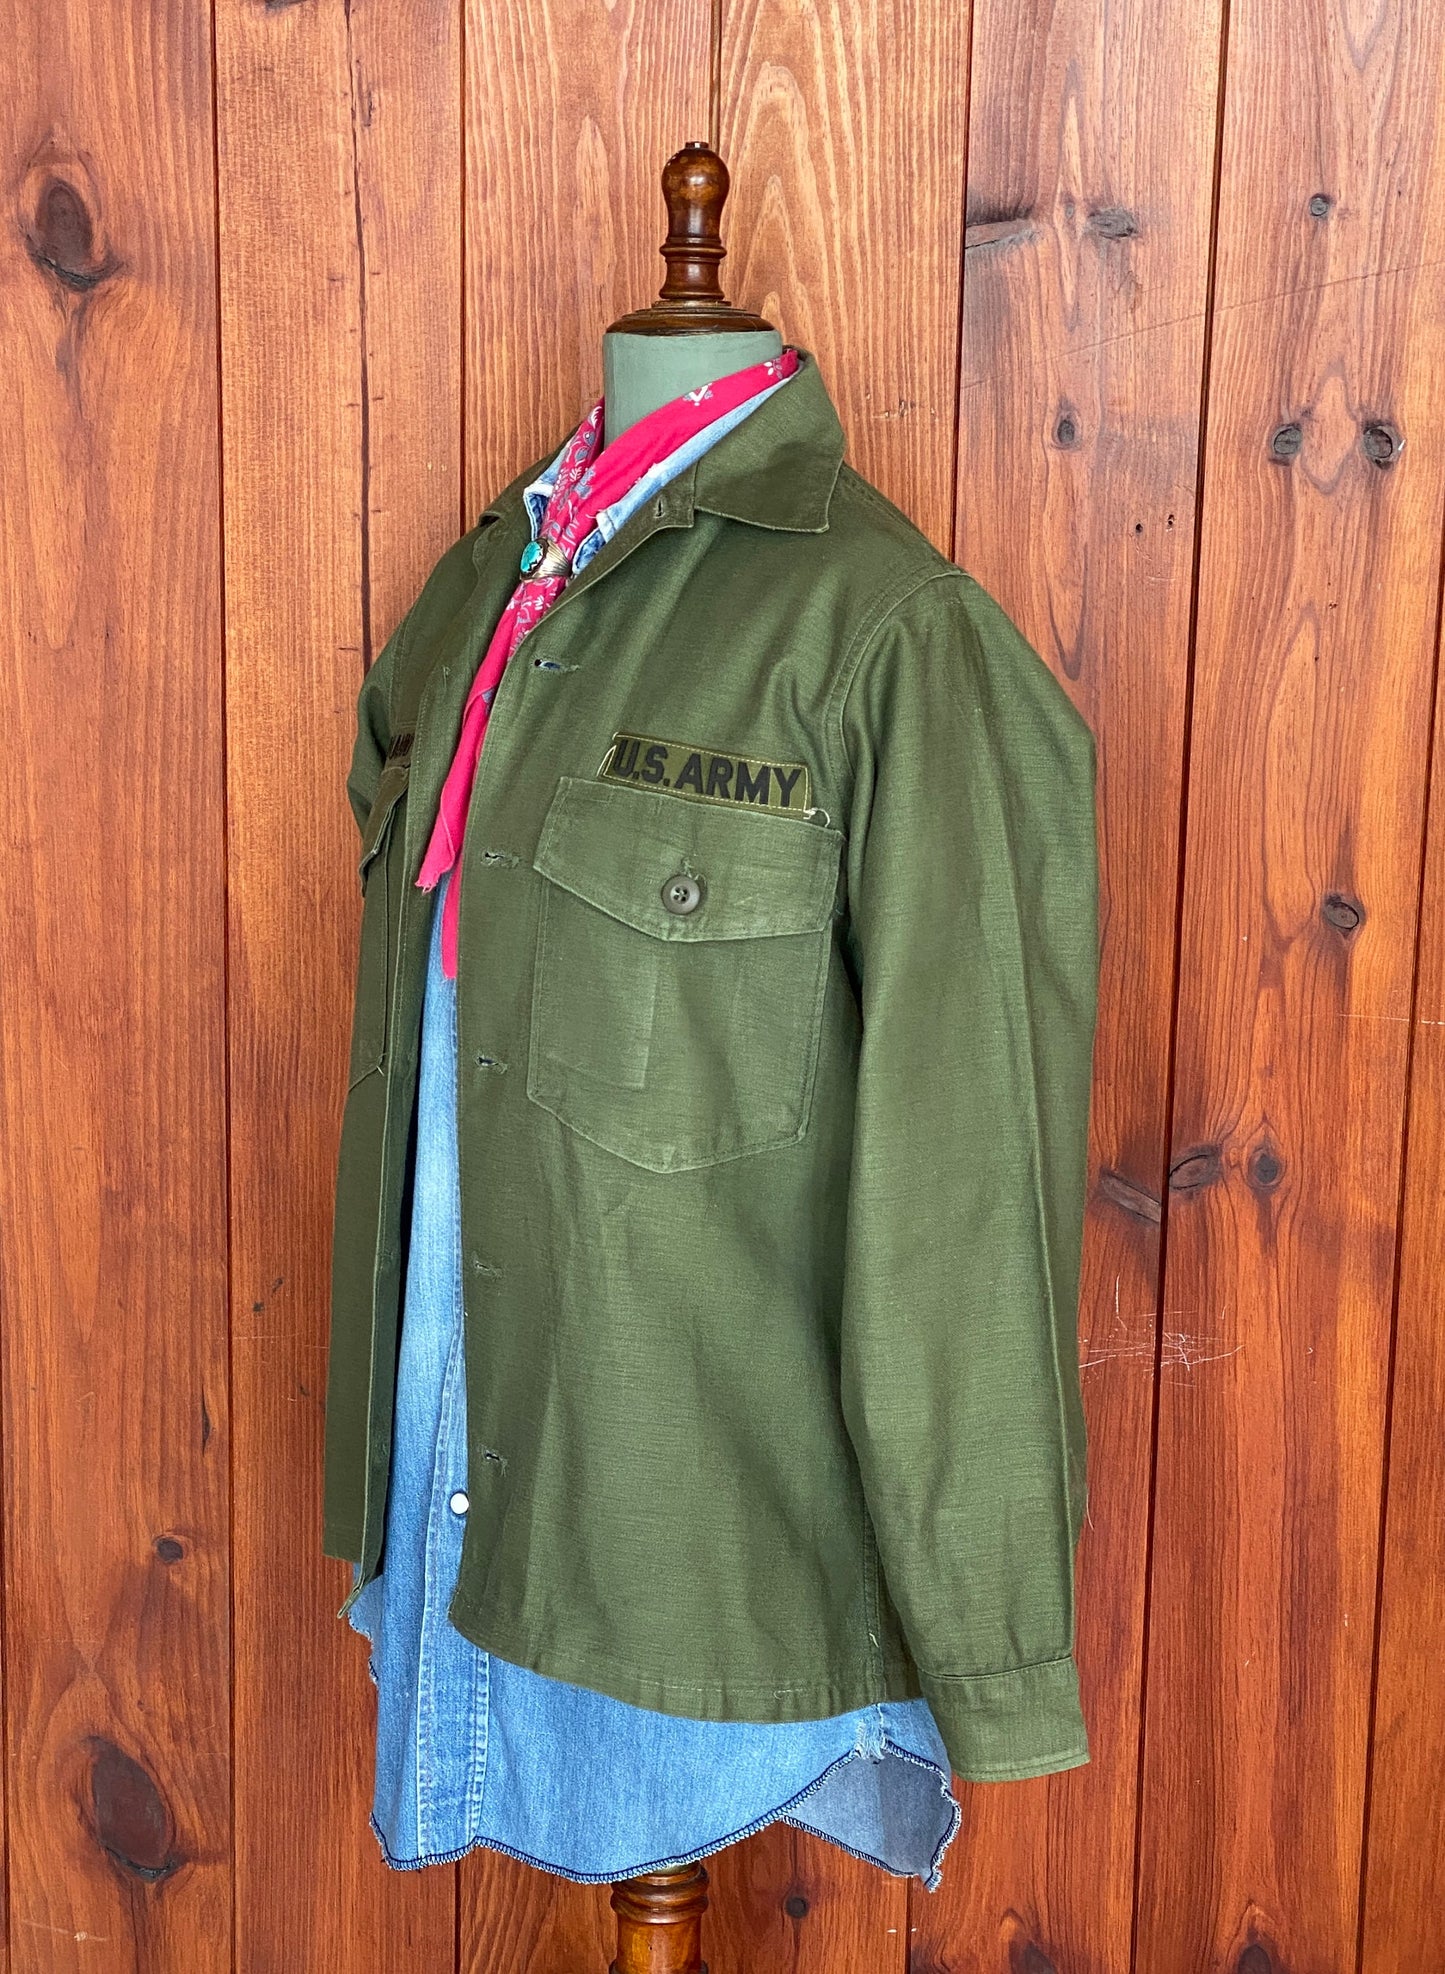 X Small Short. Authentic 60s US Army Type I vintage OG-107 fatigue shirt.